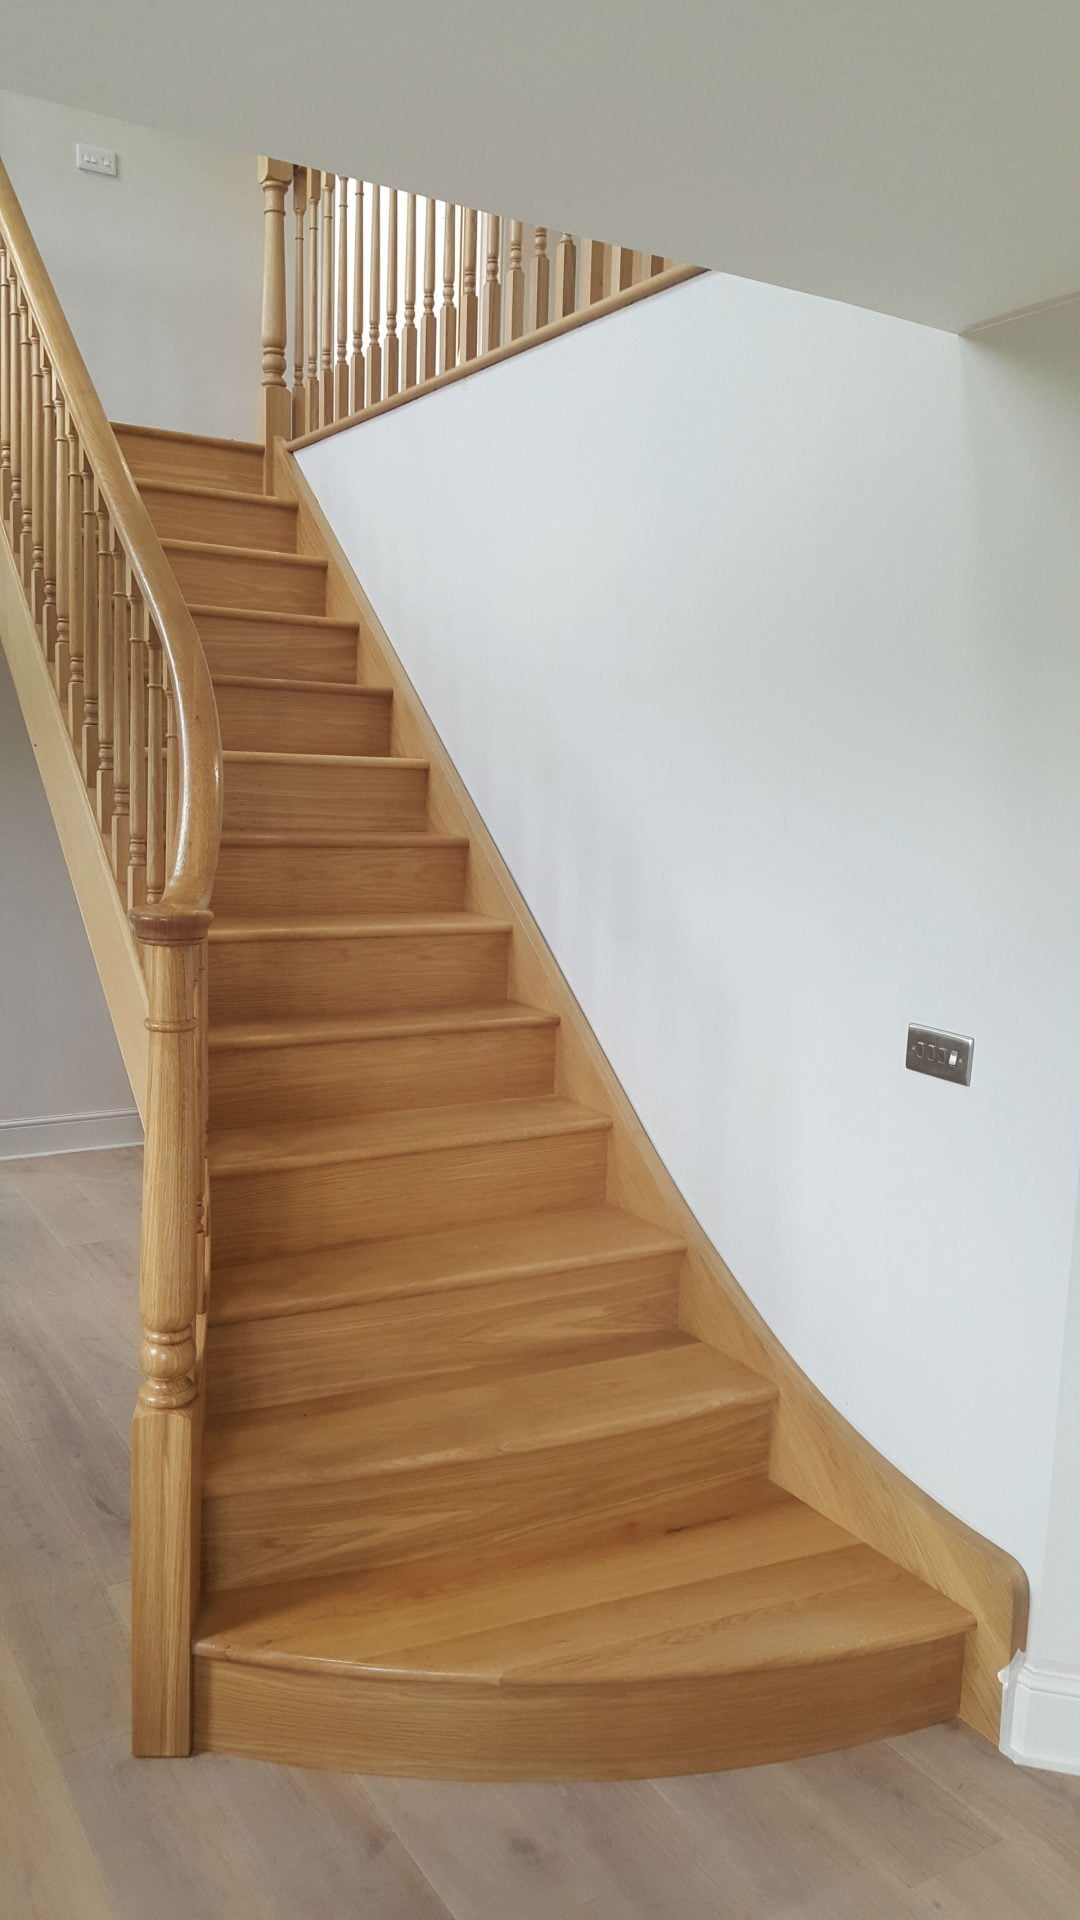 Bespoke curved oak staircase treads , handrail and spindles, designer staircase / bannister, new oak